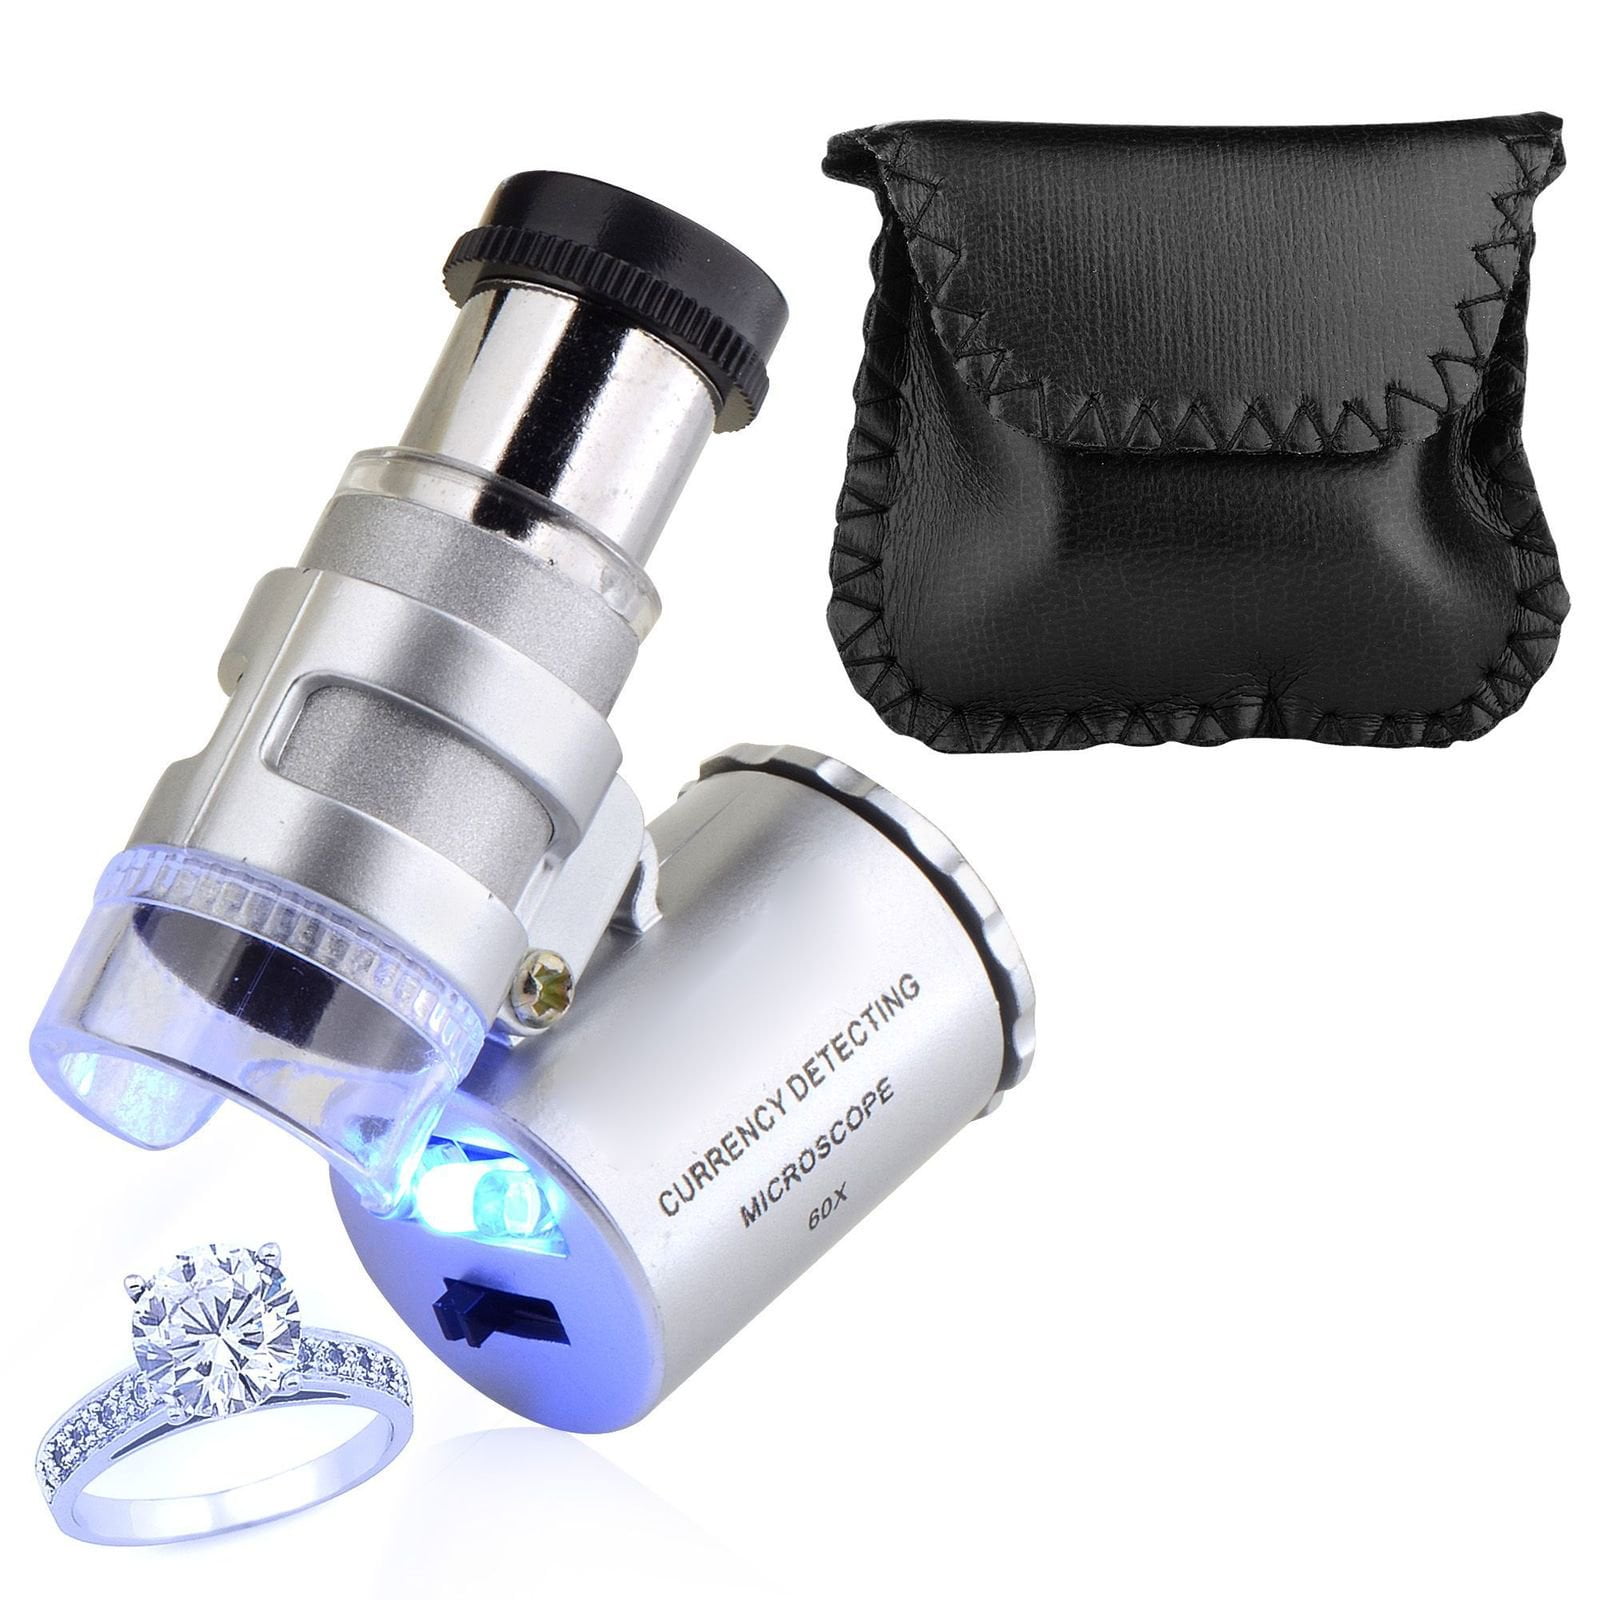 ILLumination No Reading Microscope Optical Lenses Magnifier Repair Lighting  Magnifying Glass Loupe - AliExpress